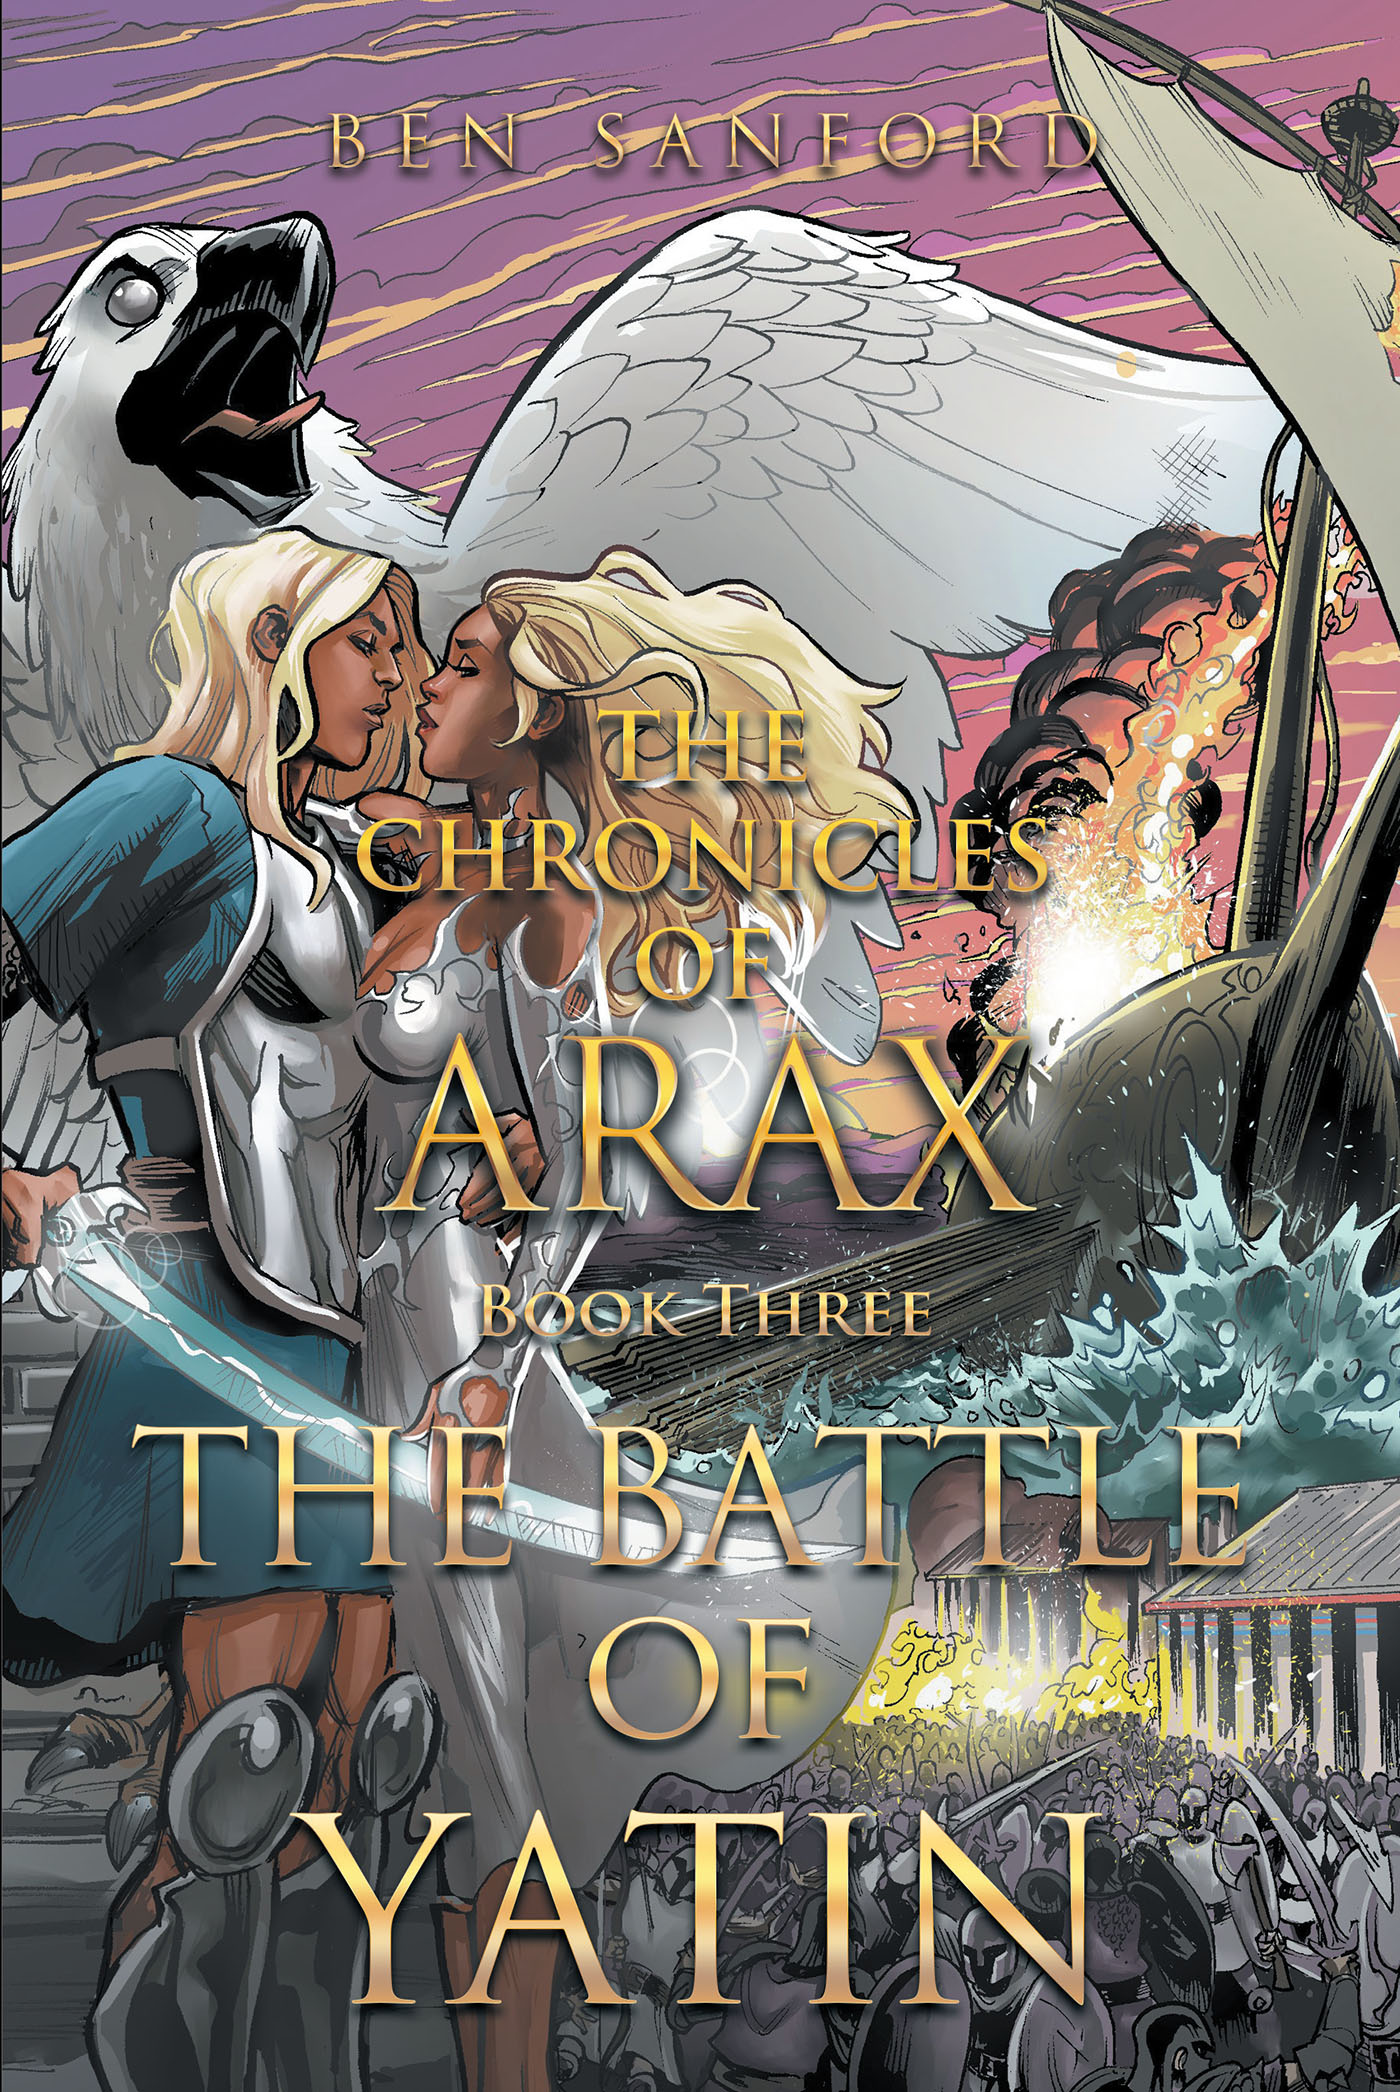 Author Ben Sanford’s New Book, "The Chronicles of Arax Book Three: The Battle of Yatin," is an Epic and Immersive Fantasy Novel Following the War Spreading Across Arax